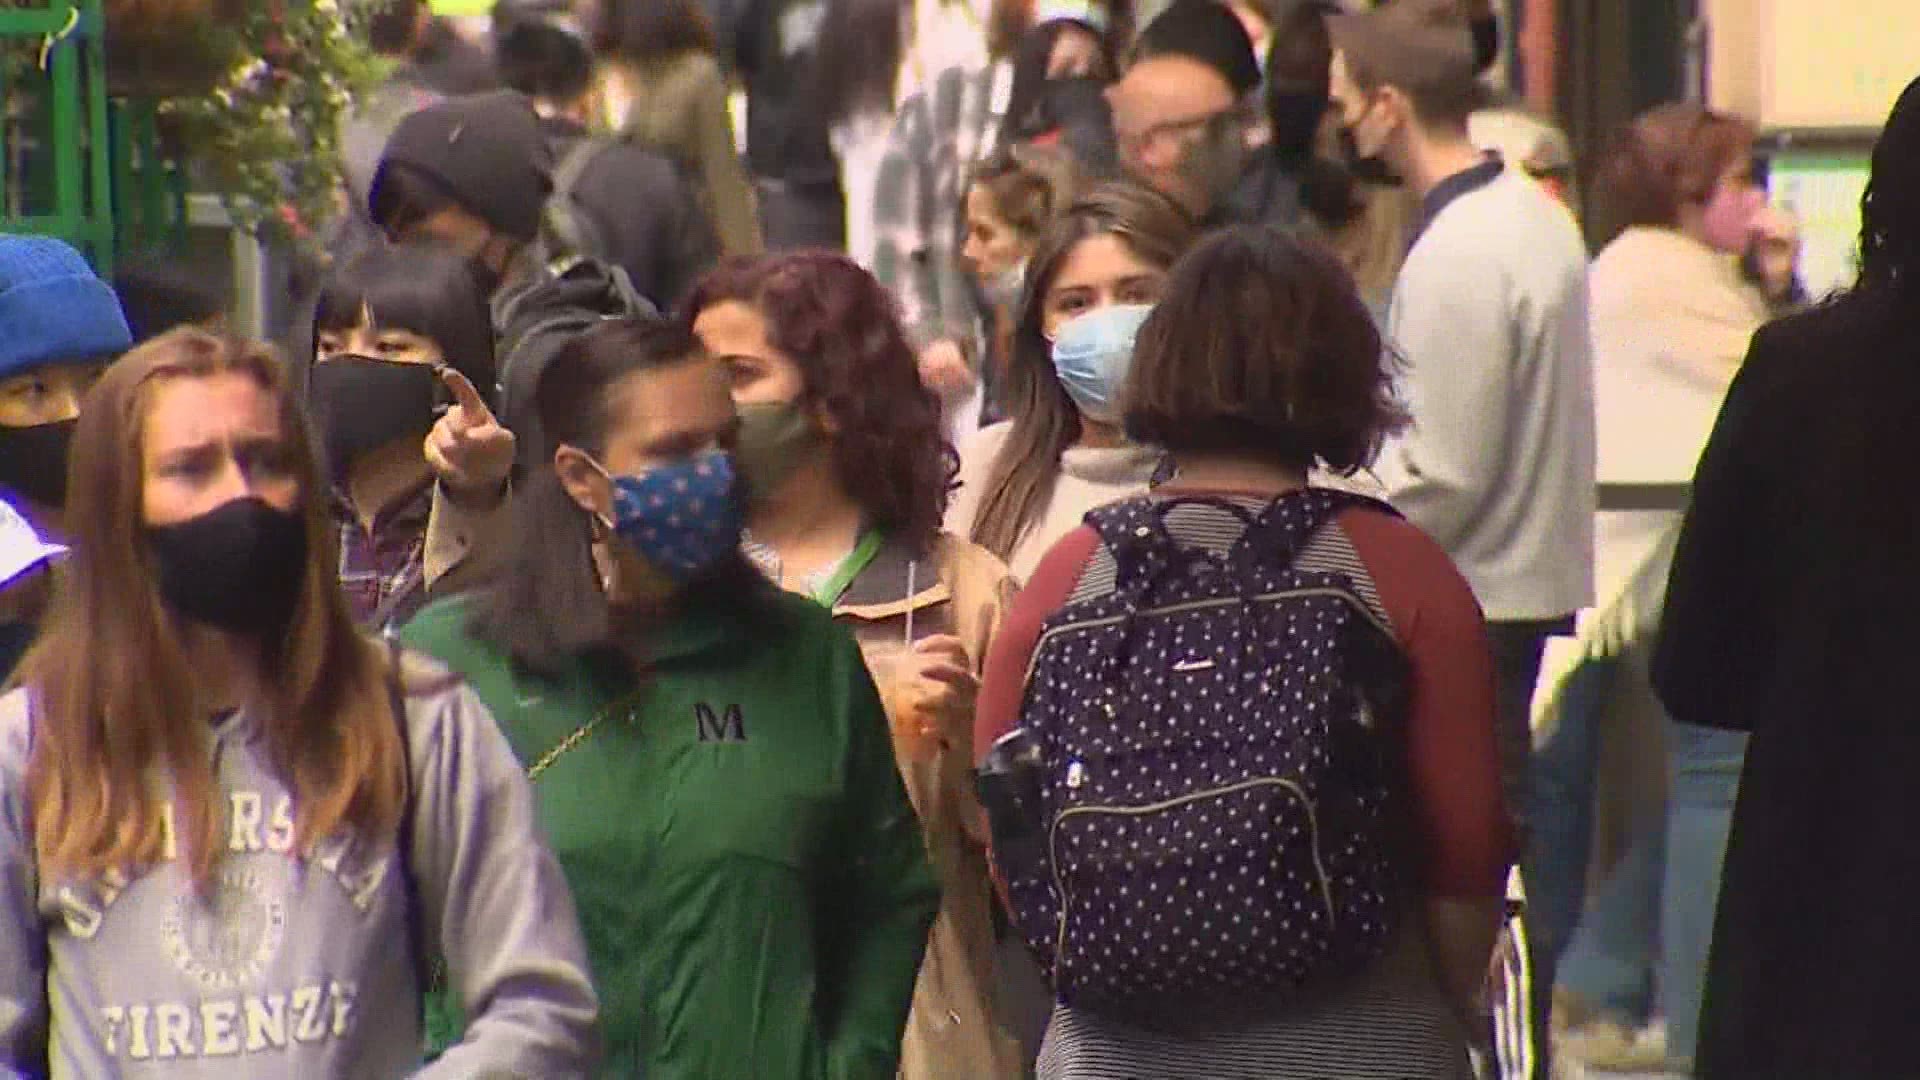 Eight Washington health officers are recommending all residents wear face masks indoors to prevent the spread of the “highly contagious delta variant.”